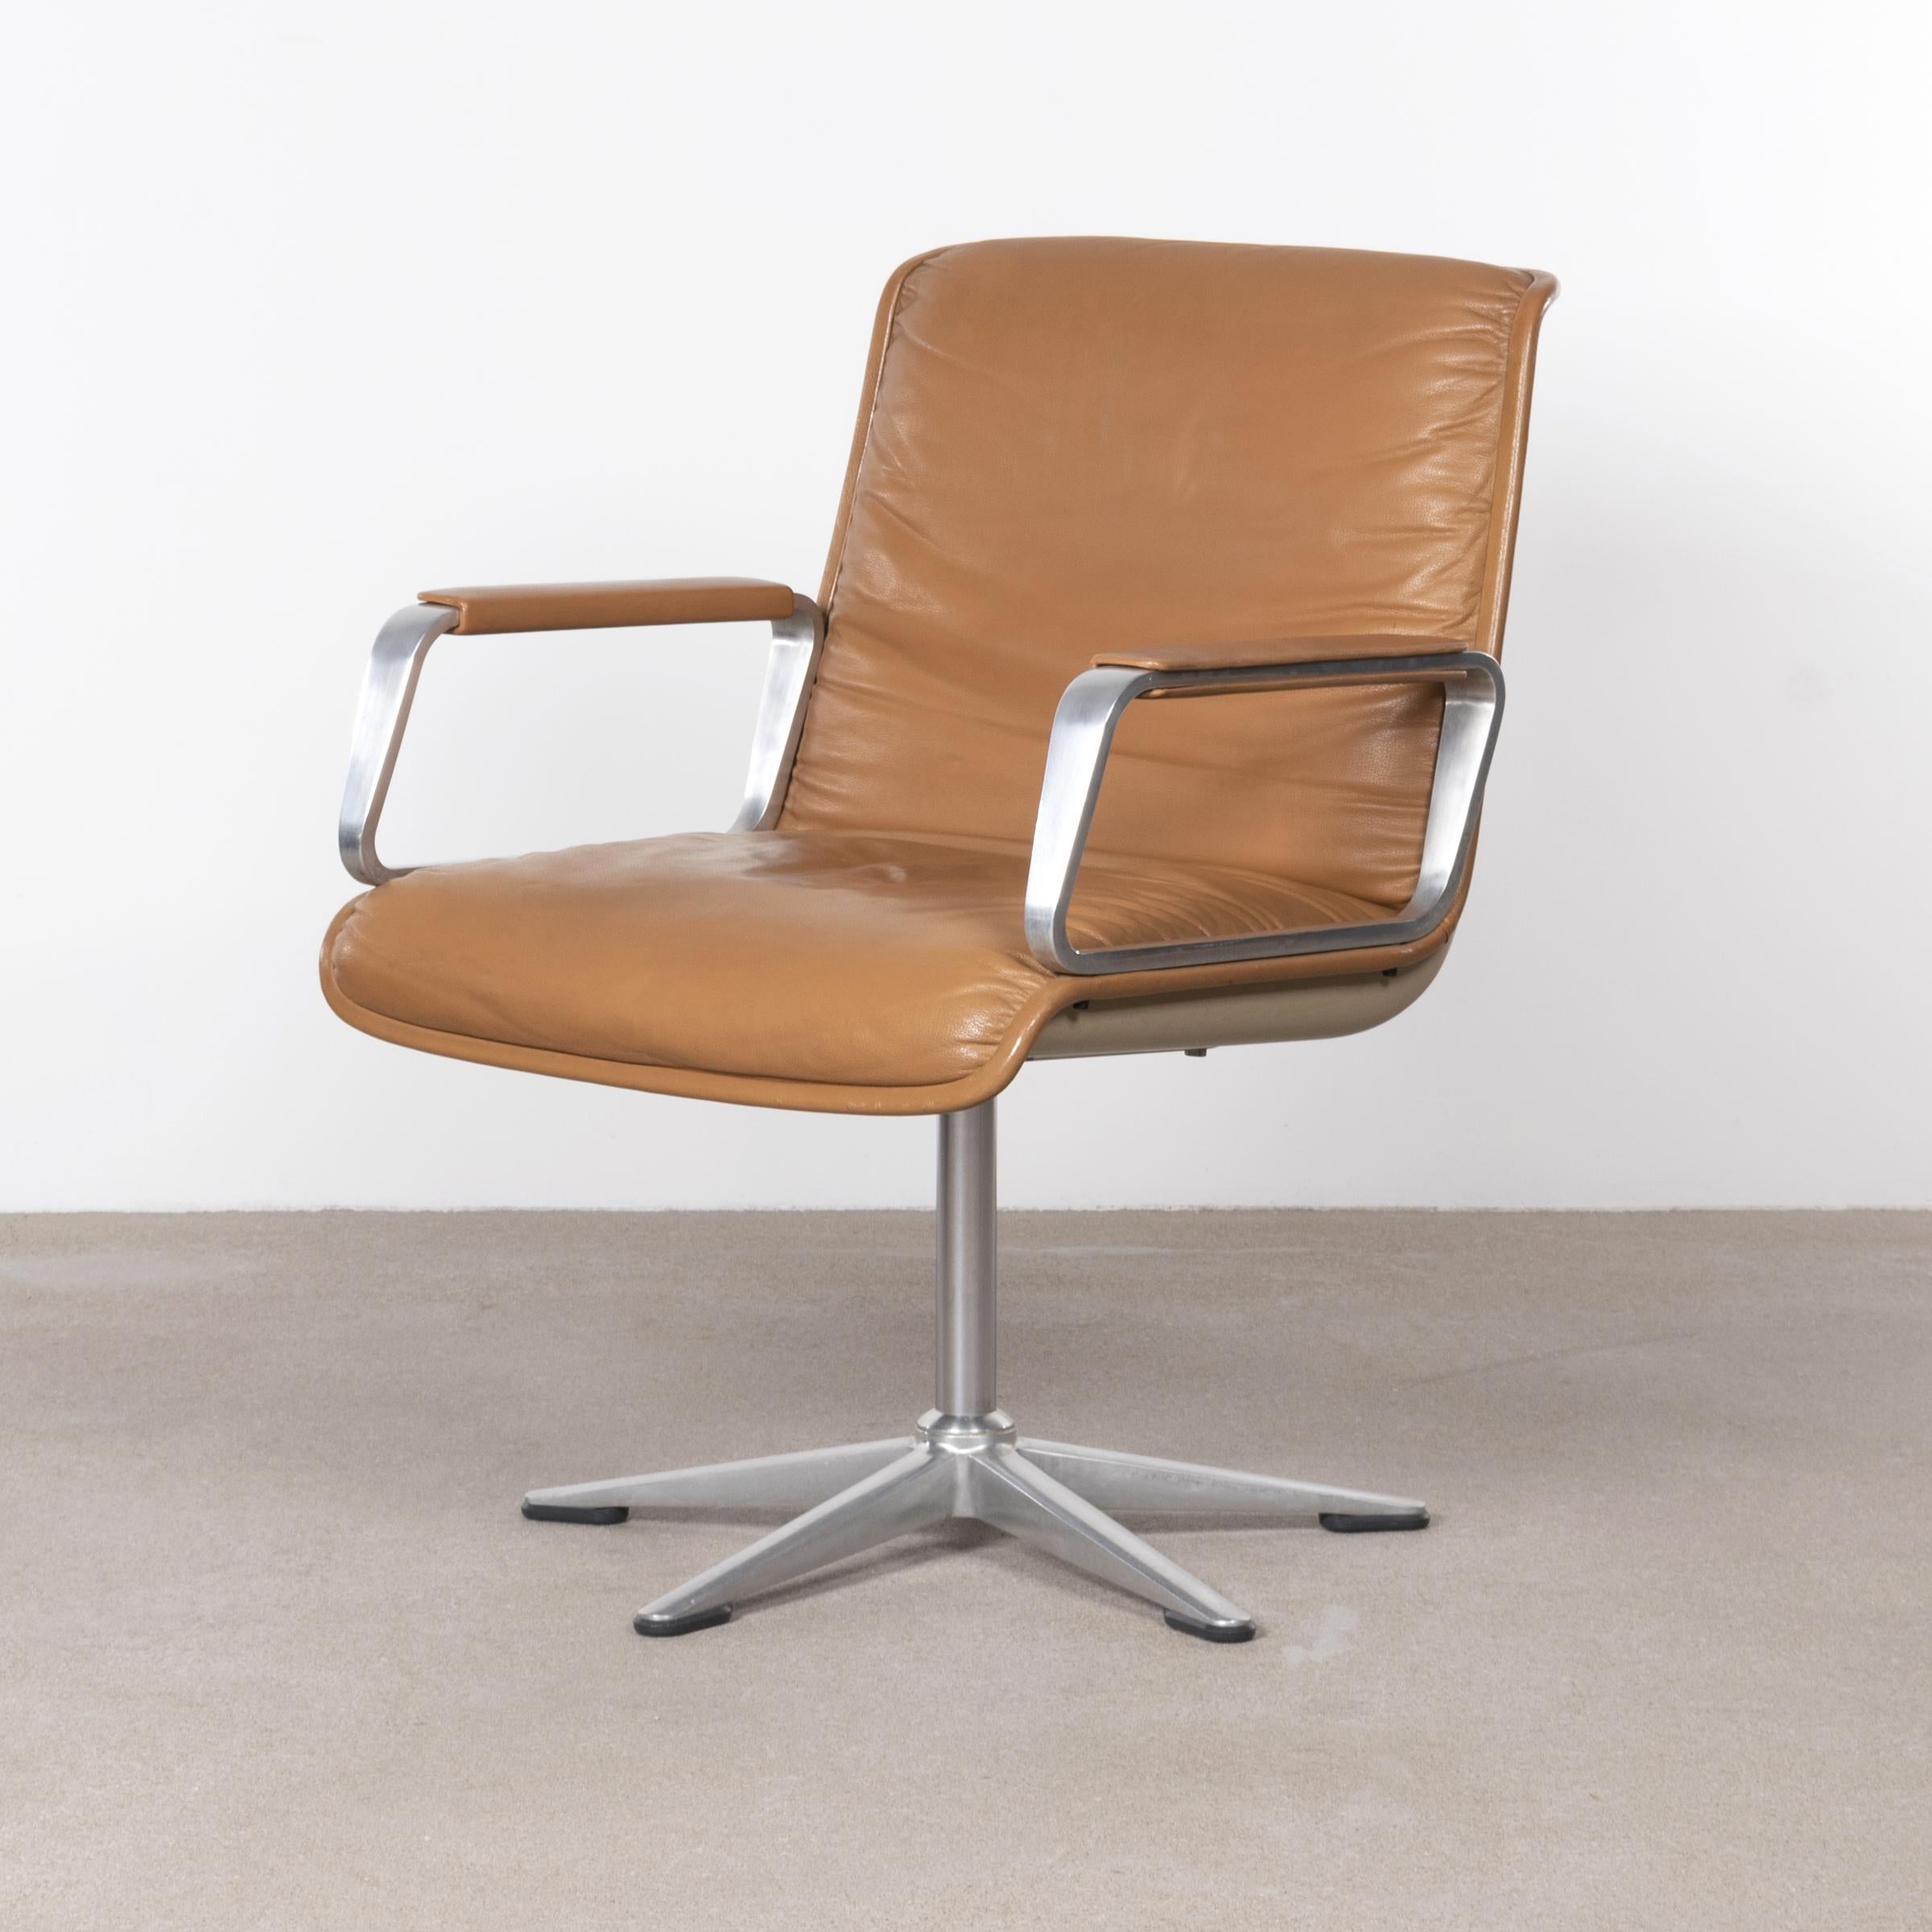 Molded Delta Design Program 2000 Soft Pad Chairs in Cognac Leather for Wilkhahn, 1968